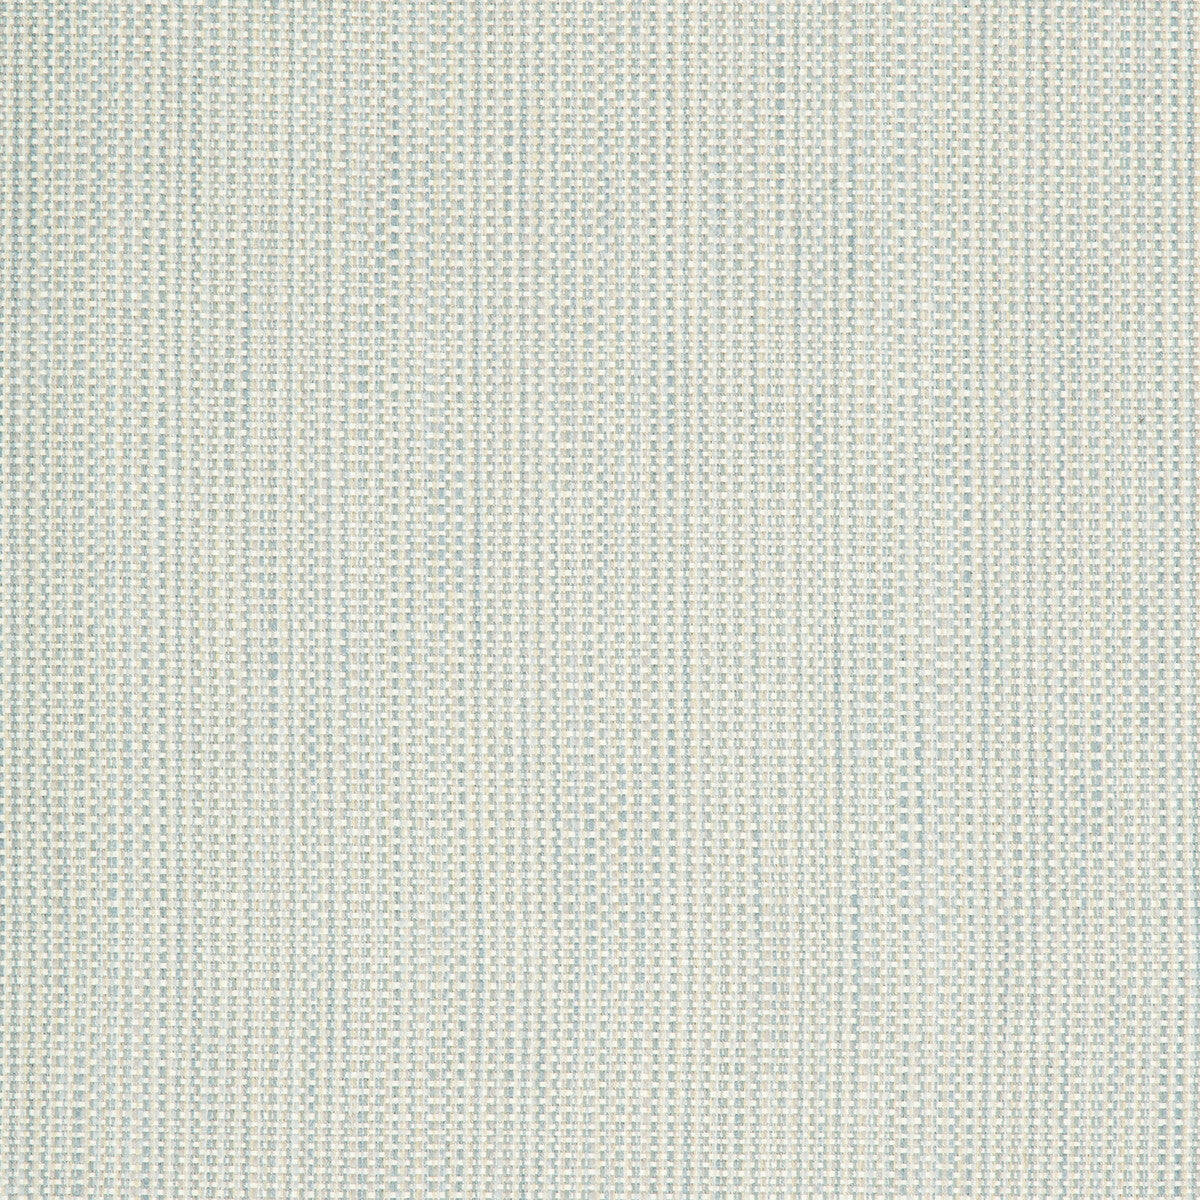 Kravet Smart fabric in 34627-1511 color - pattern 34627.1511.0 - by Kravet Smart in the Performance Crypton Home collection